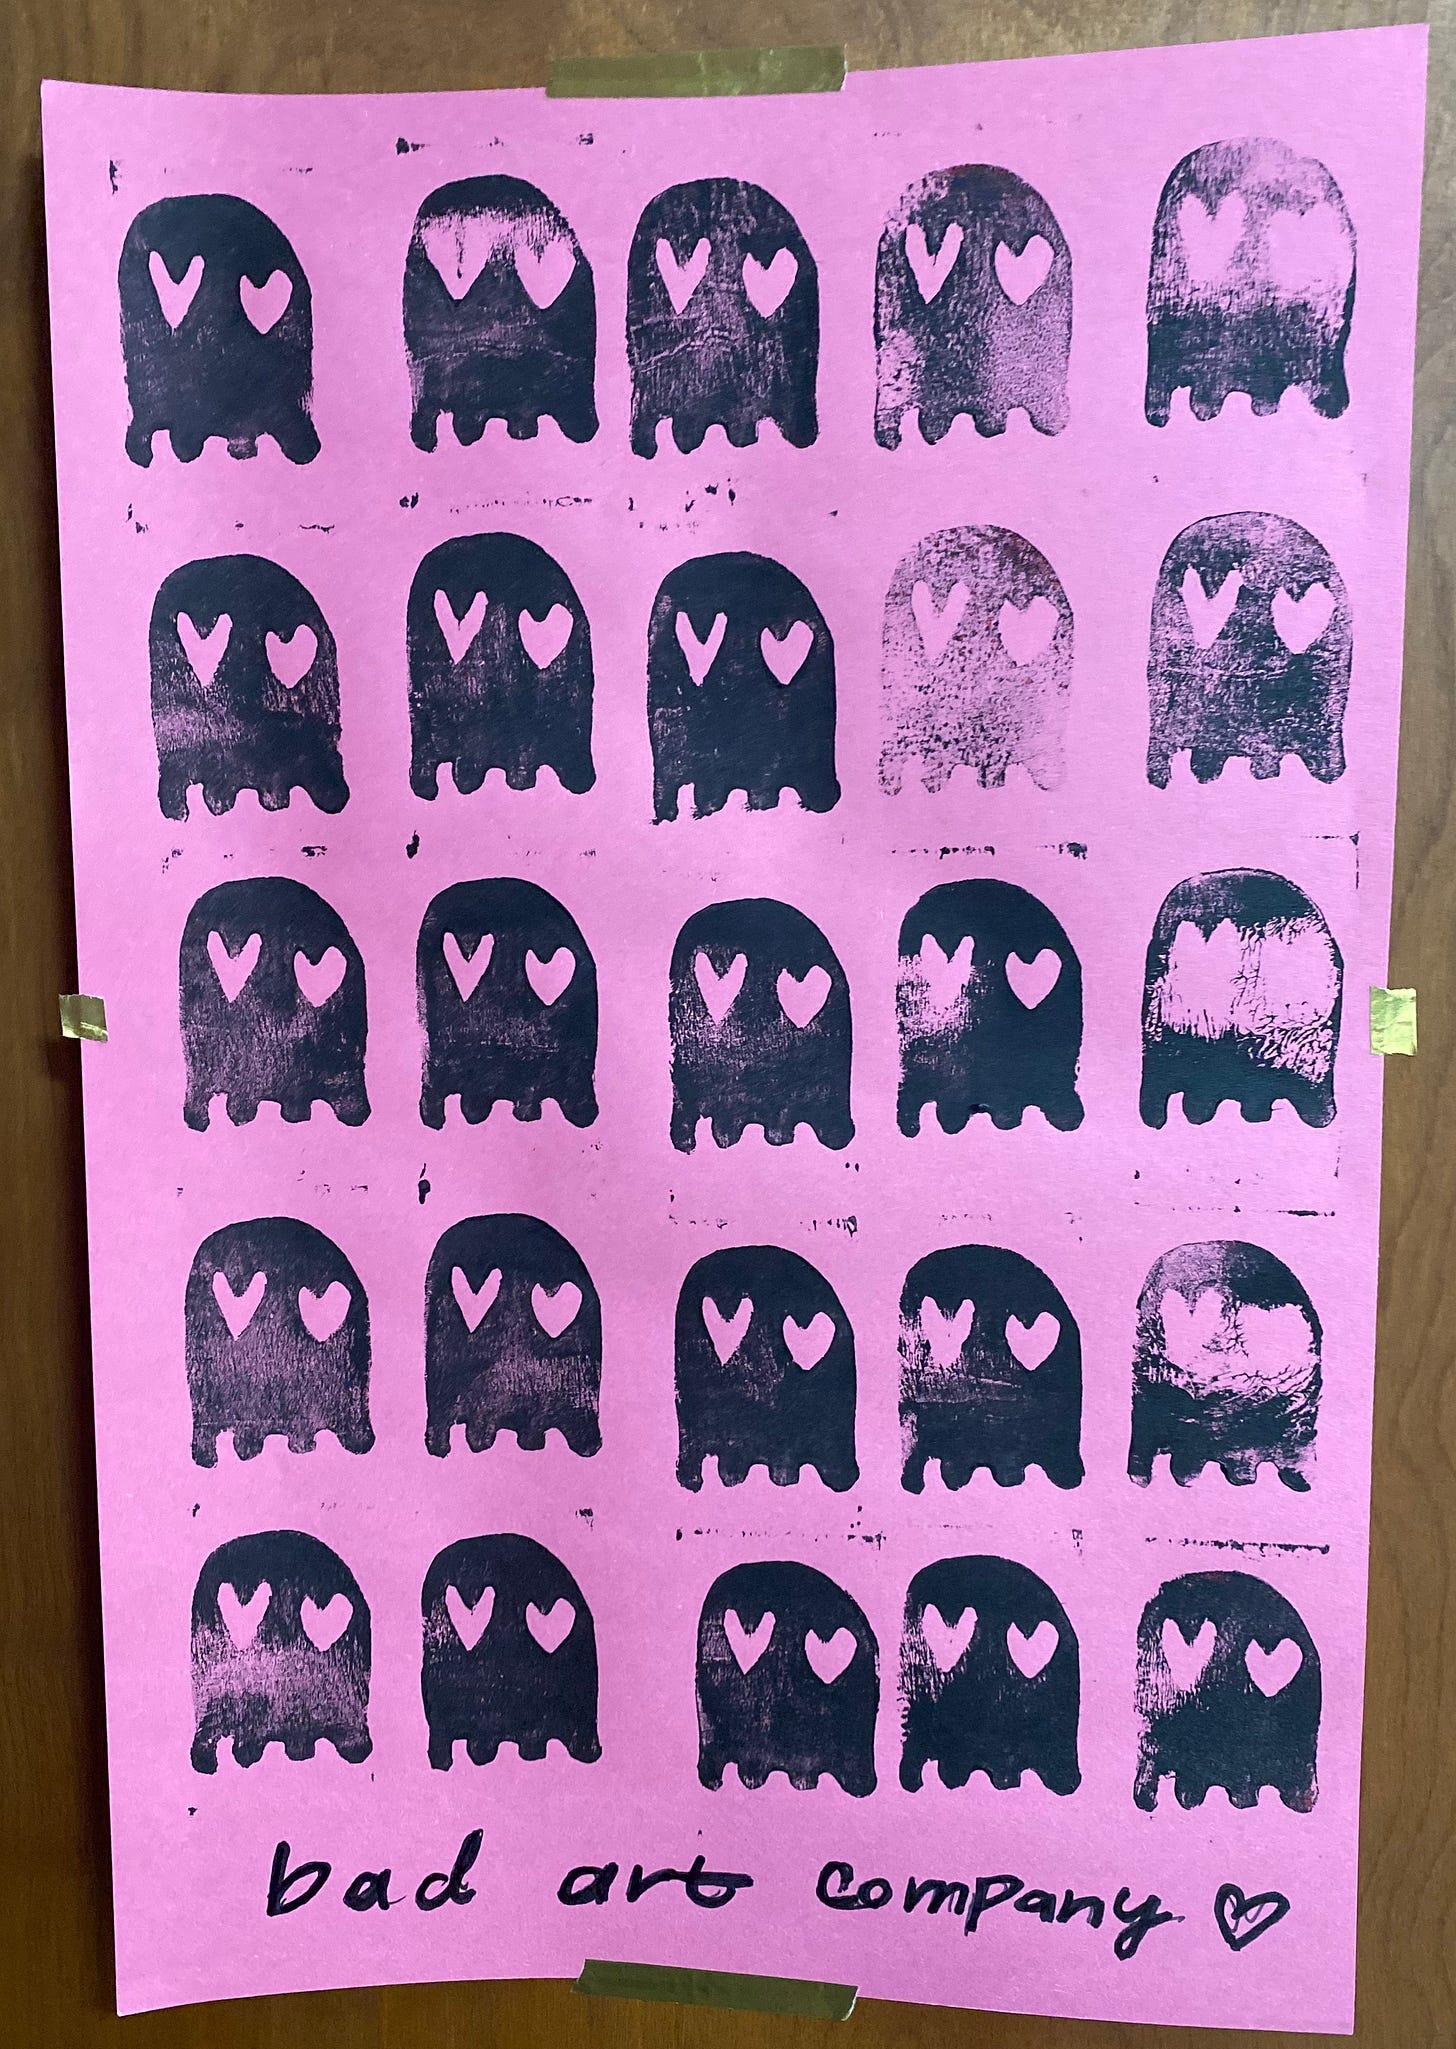 A pink poster with black stamped ghosts with heart eyes on it in a grid pattern.